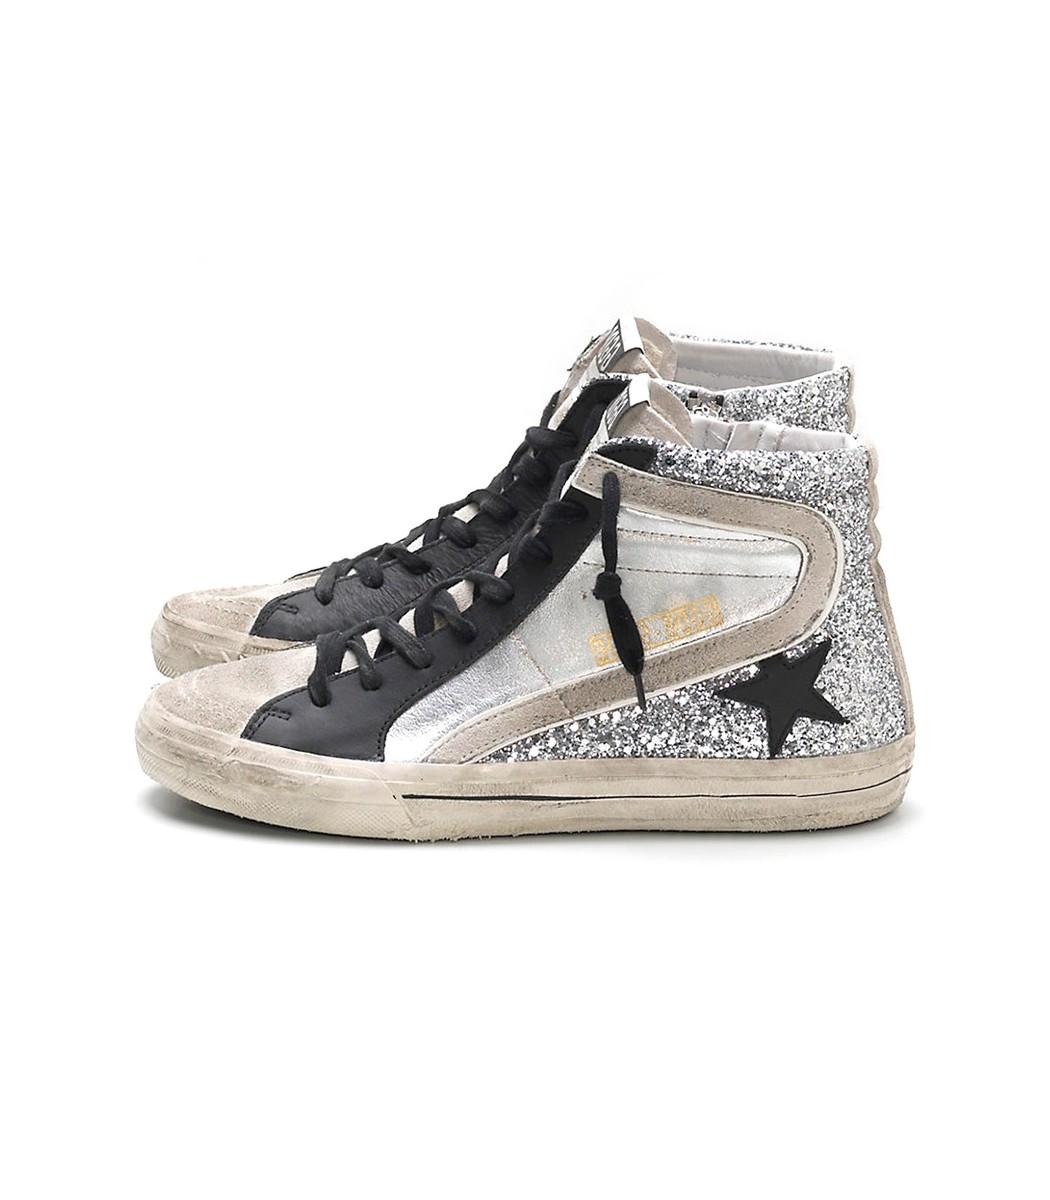 golden goose slide sneakers in silver laminated leather and glitter